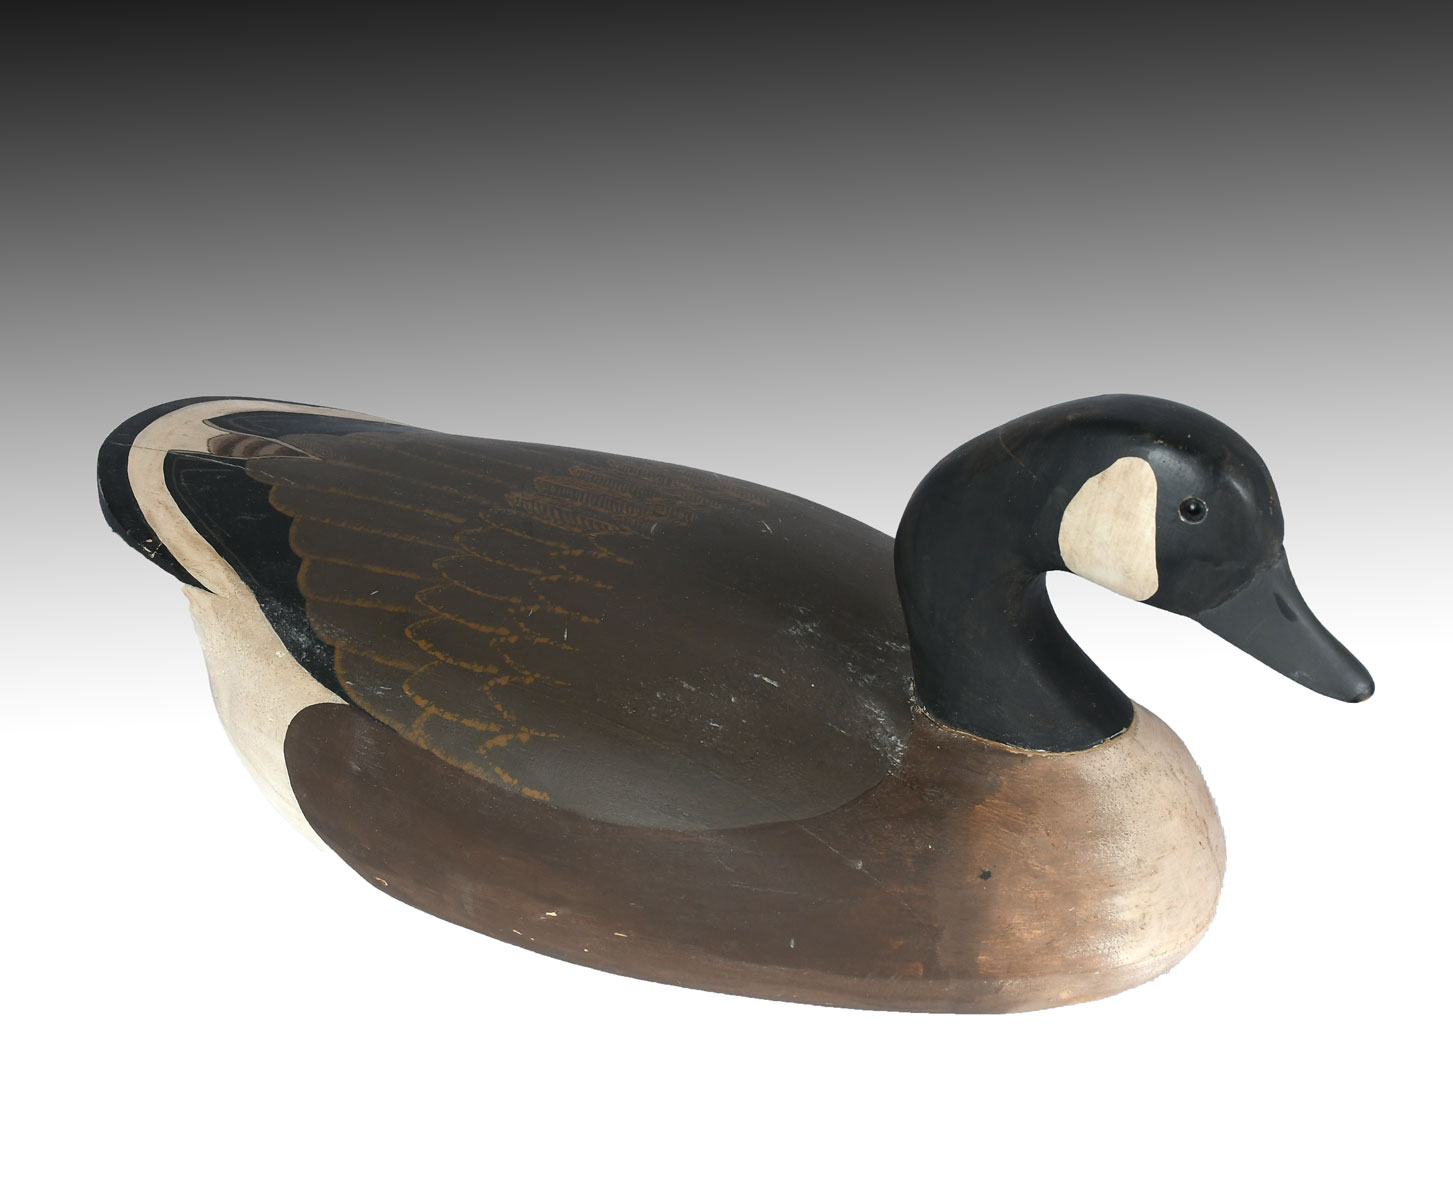 CANADIAN GOOSE WILDFOLWER DECOY